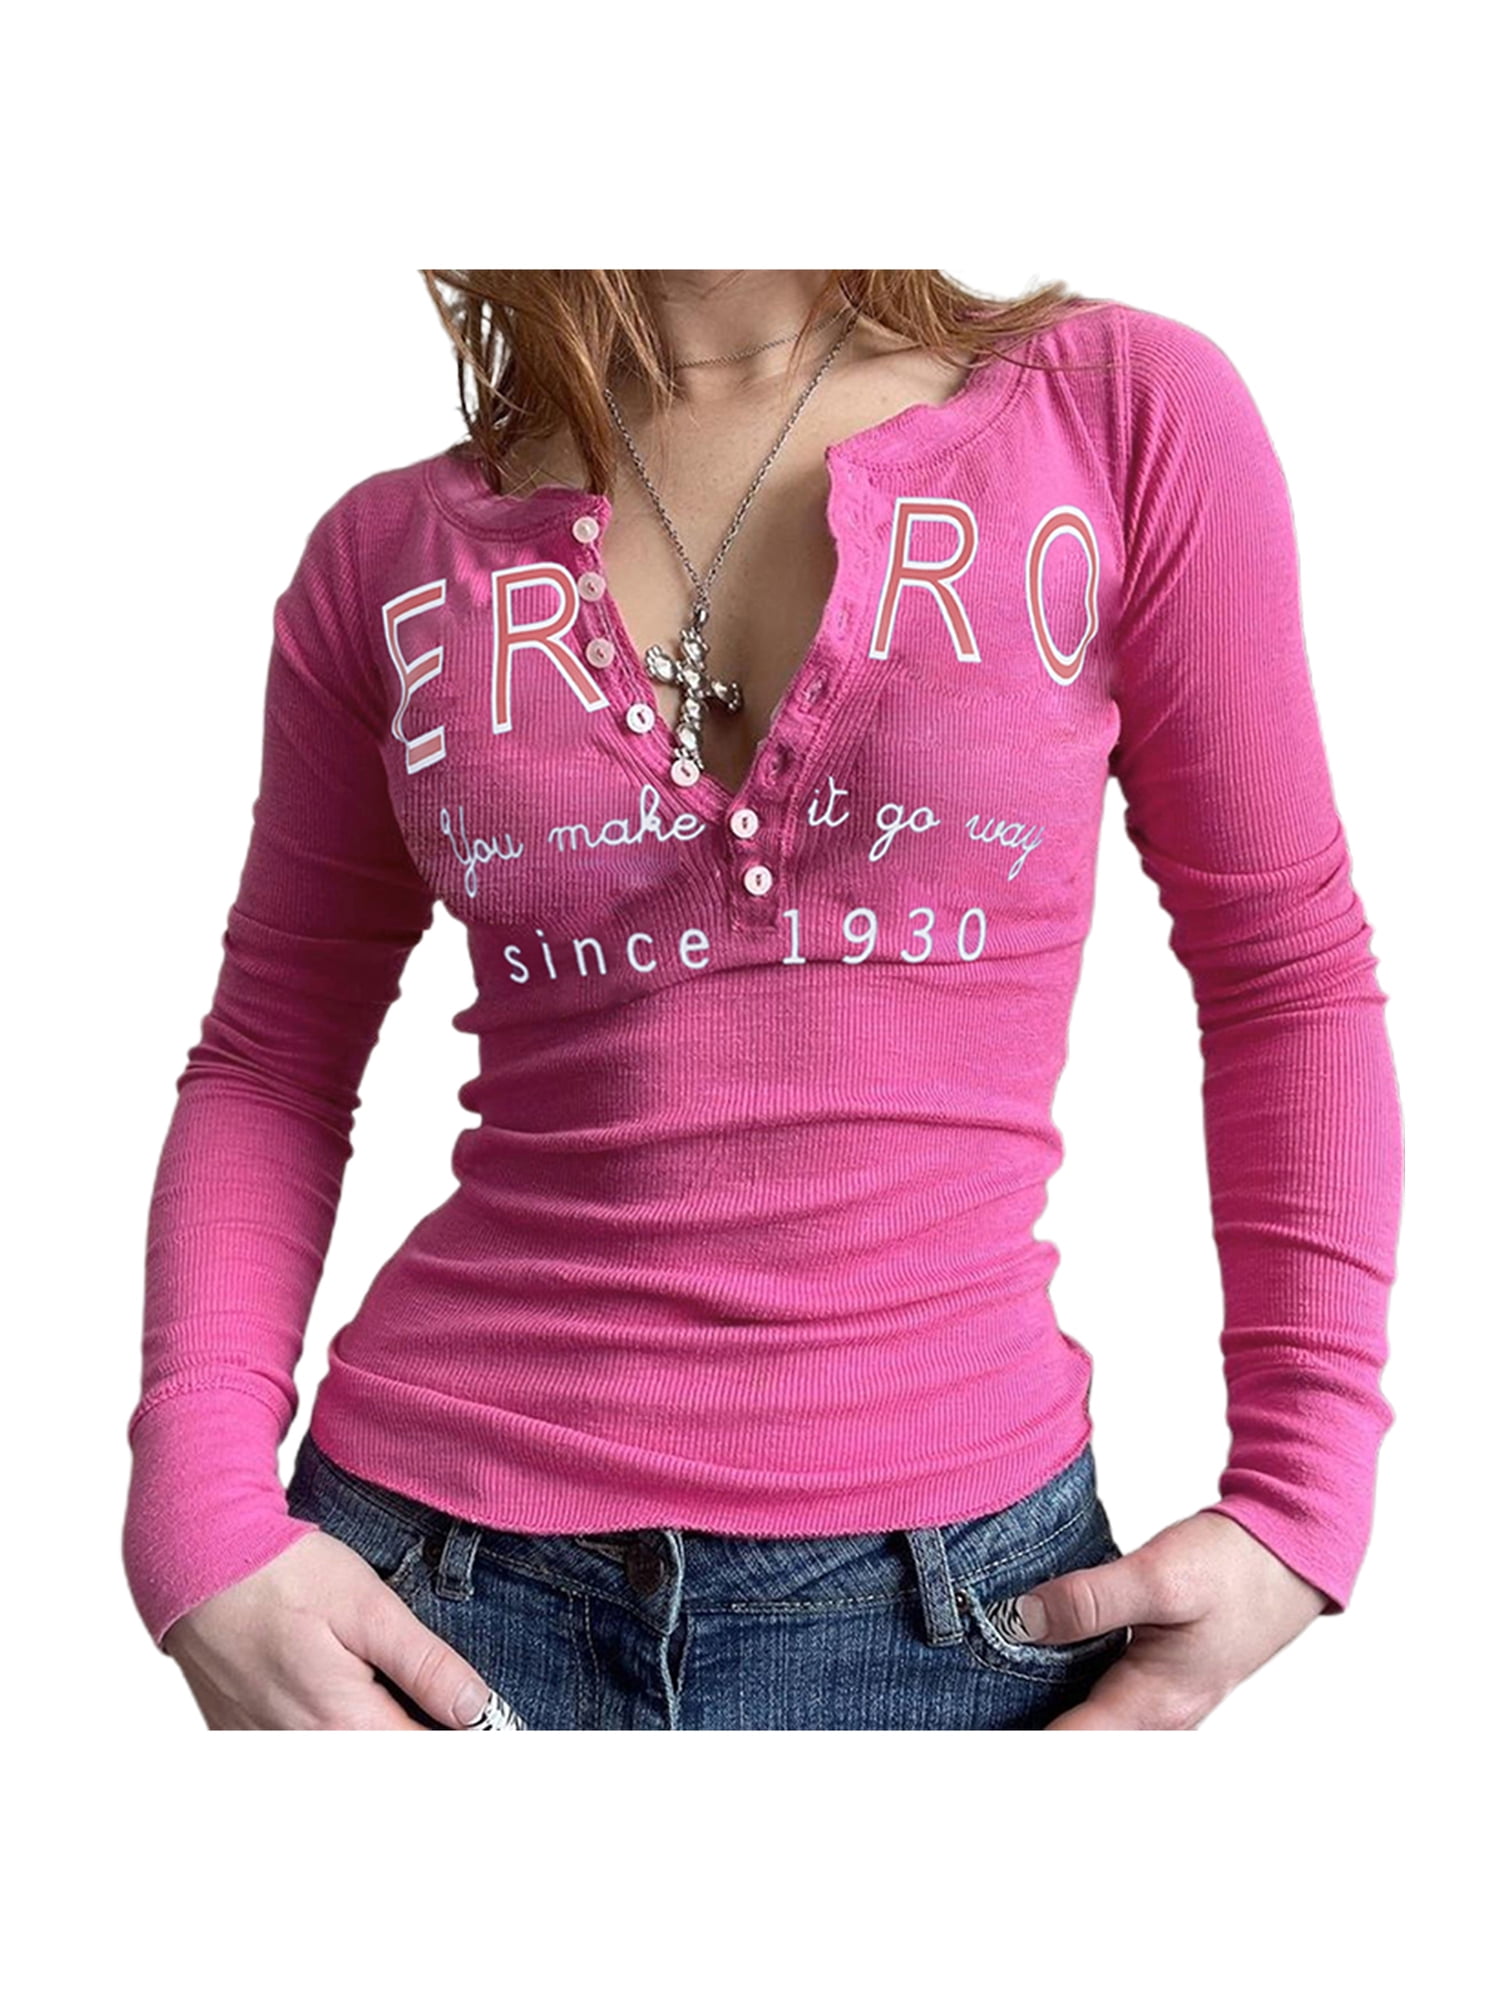 Youngnet,Womens Shirts by rain v Neck,Pink Sexy Shirts for Women,Cute  Casual top,Items Under 1 Dollar,productos de 1 Dollar, Deal for The dayboho